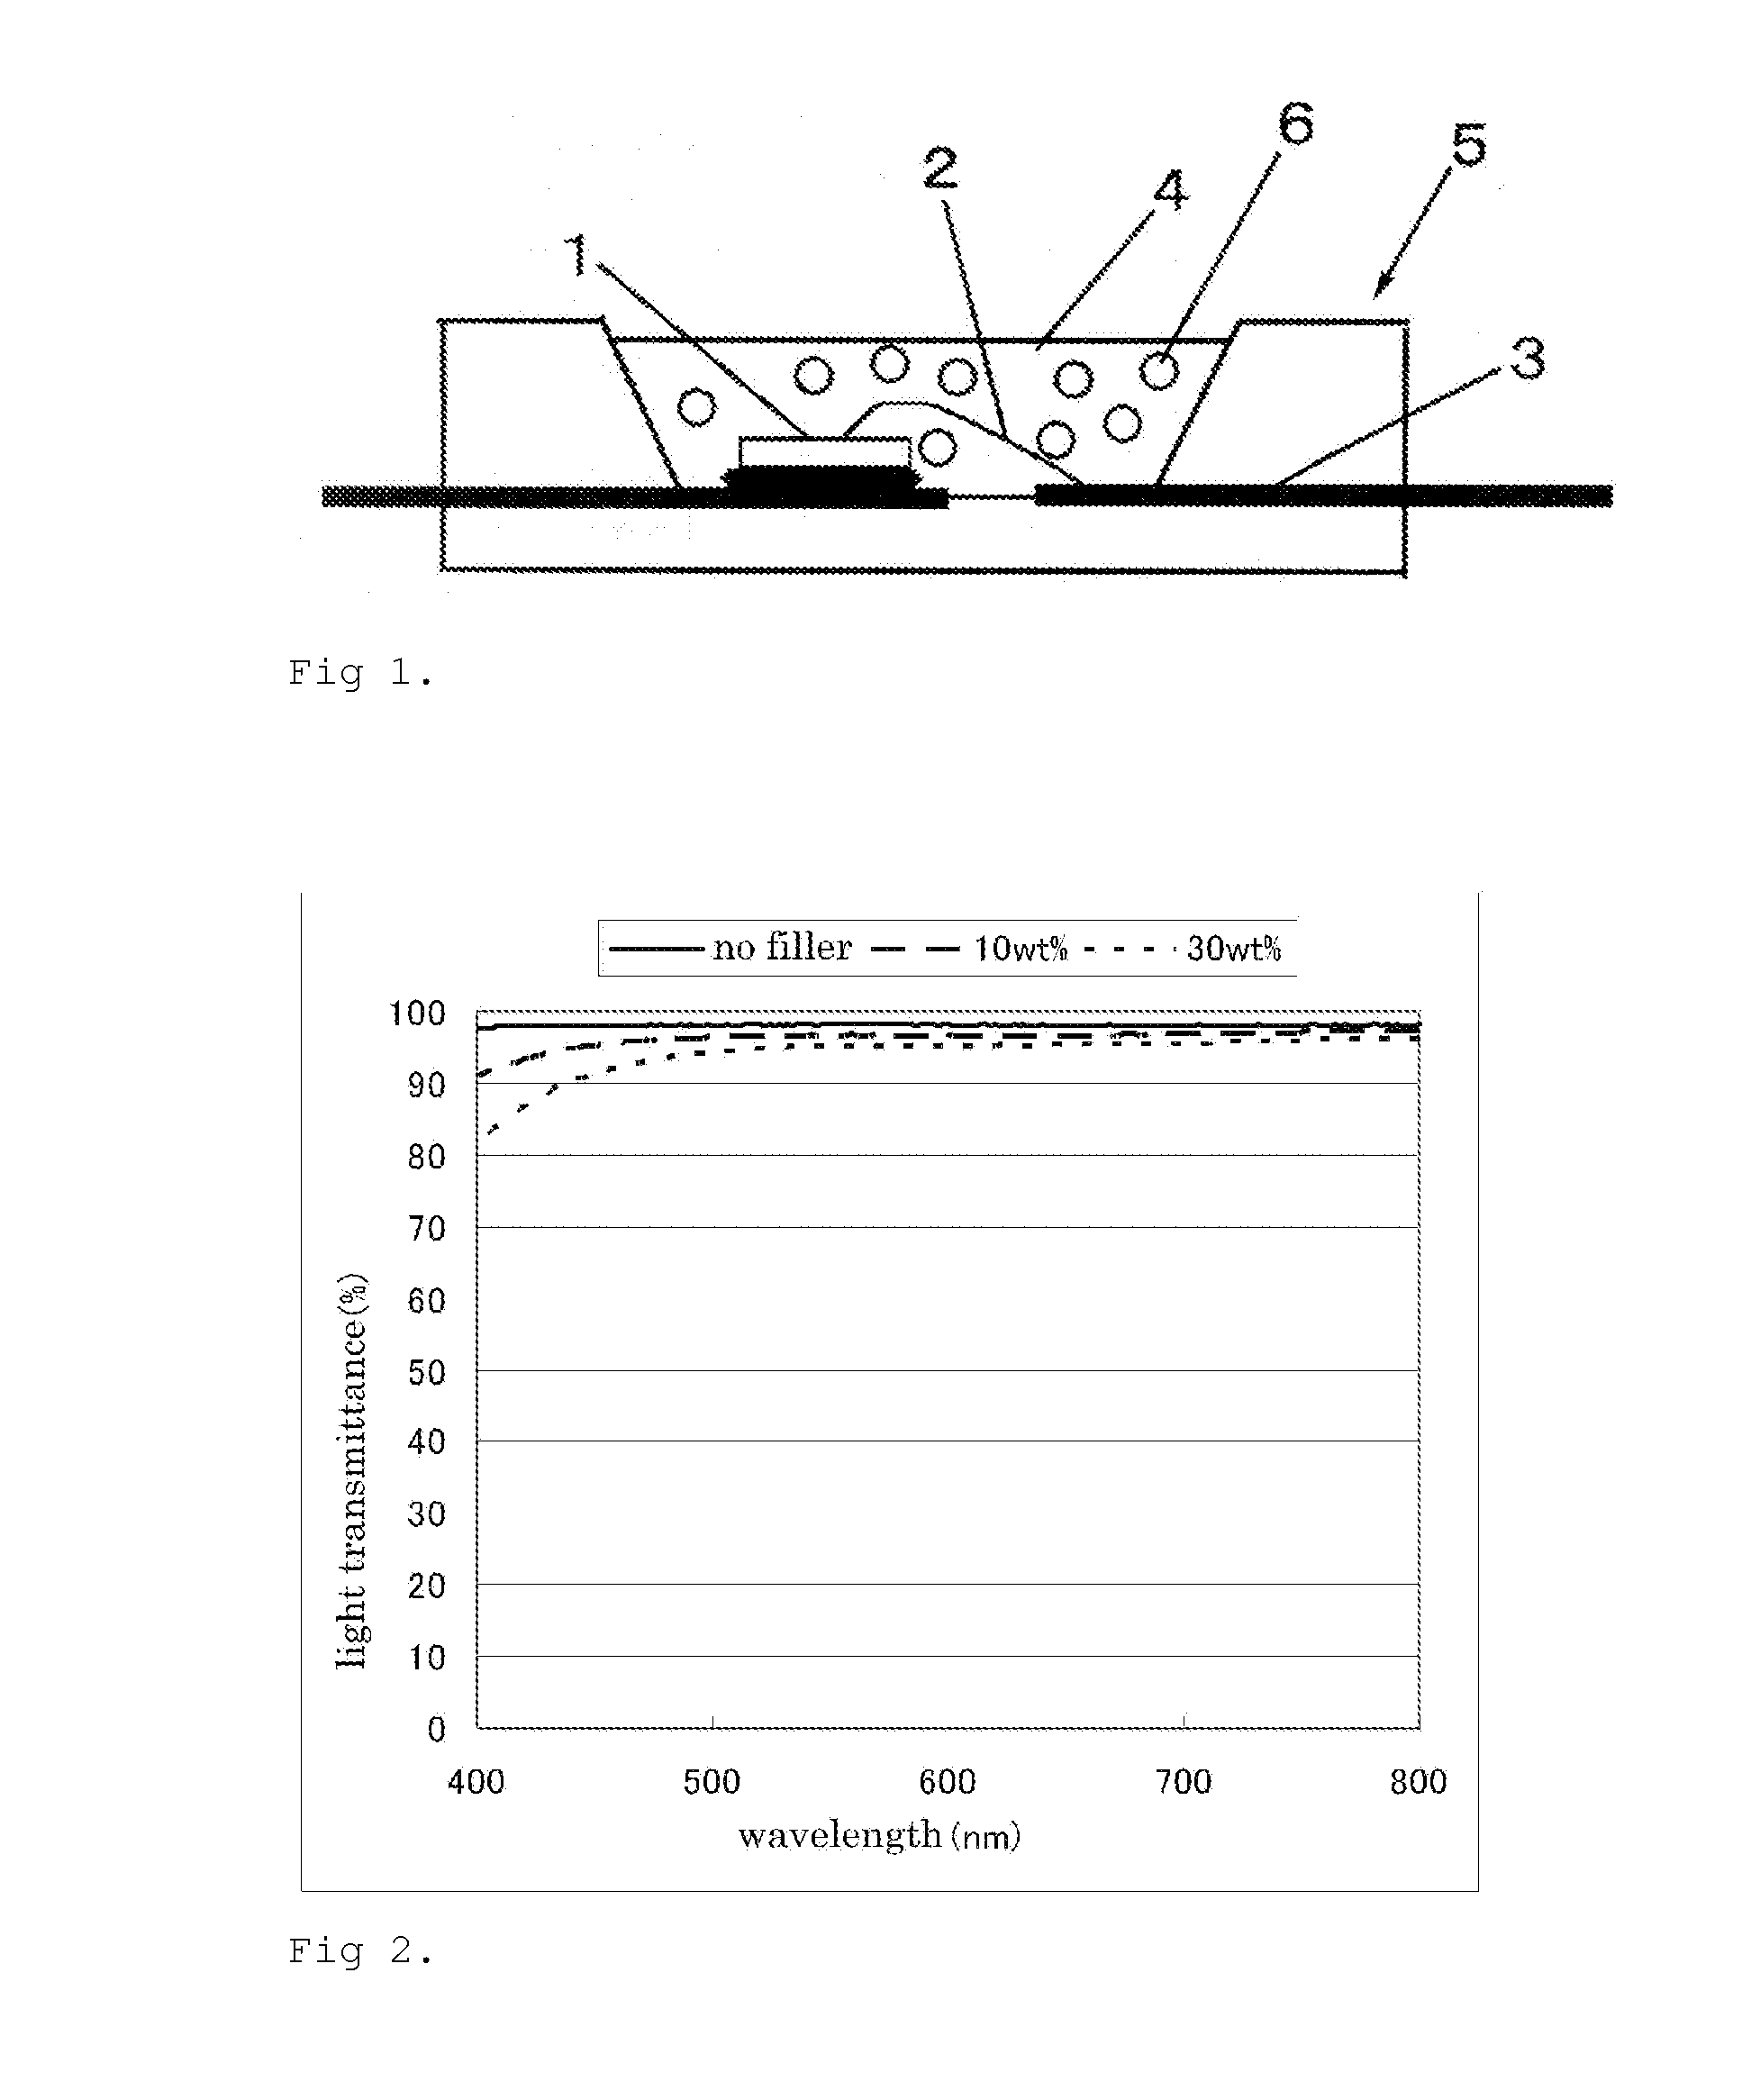 Curable silicone resin composition and light-emitting diode device using the same